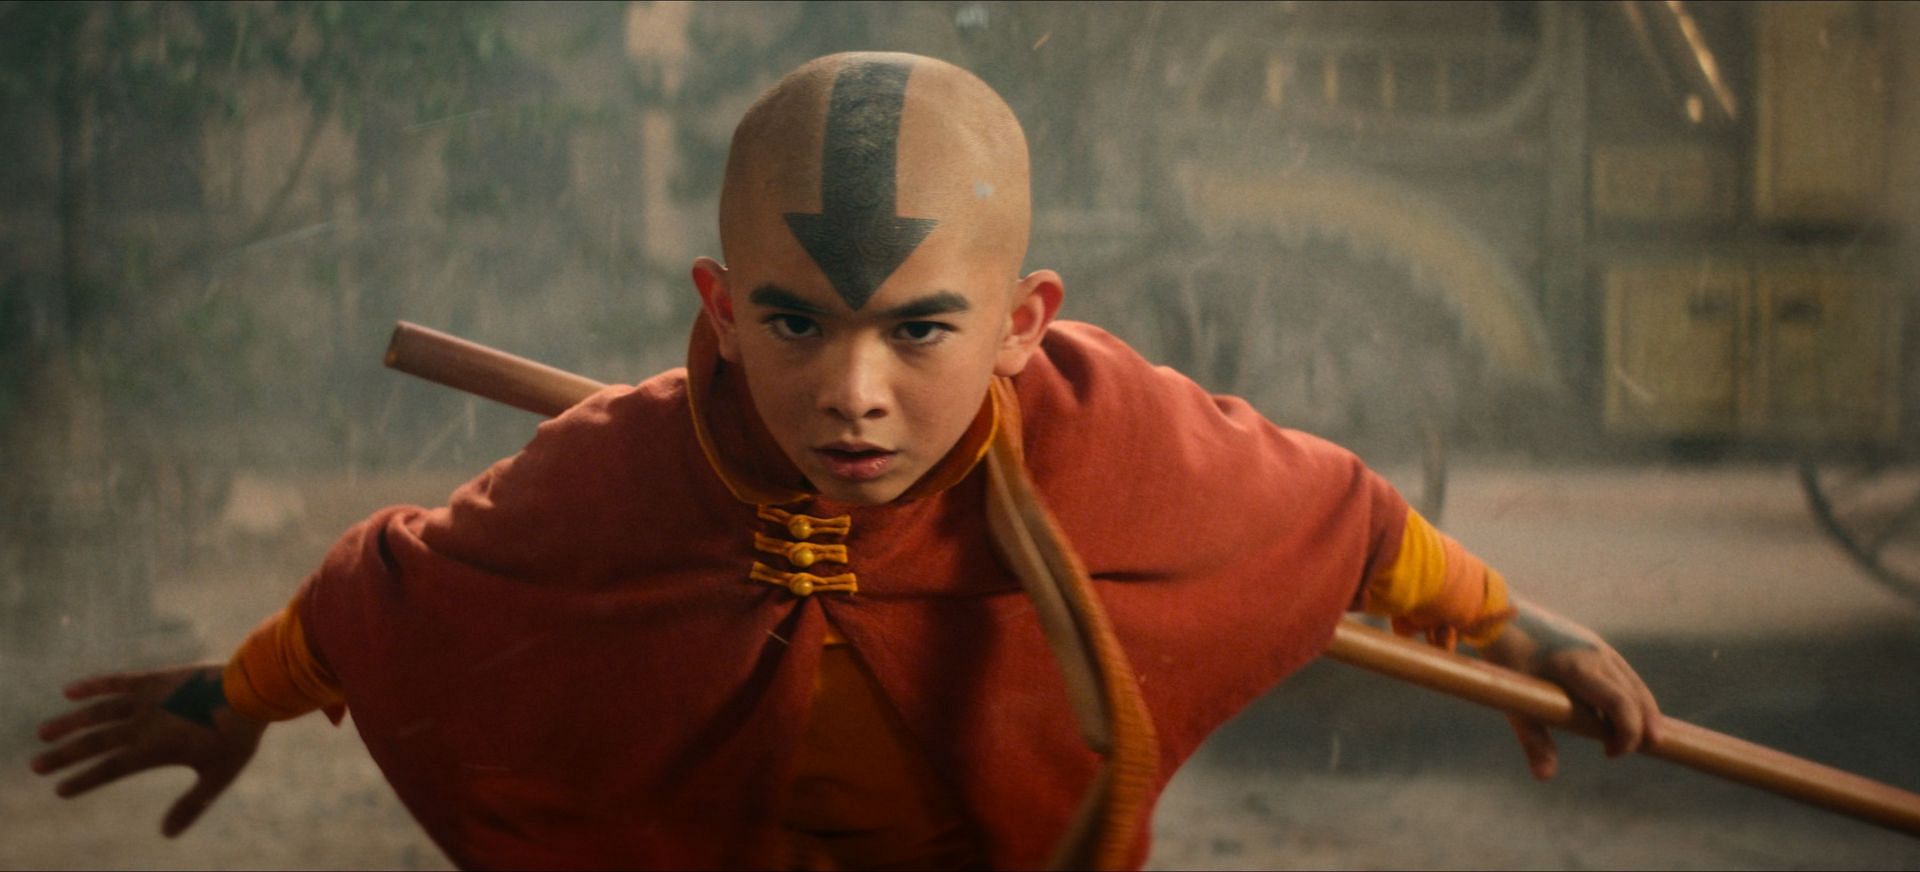 a steal from Avatar: The Last Airbender (image via Netflix)